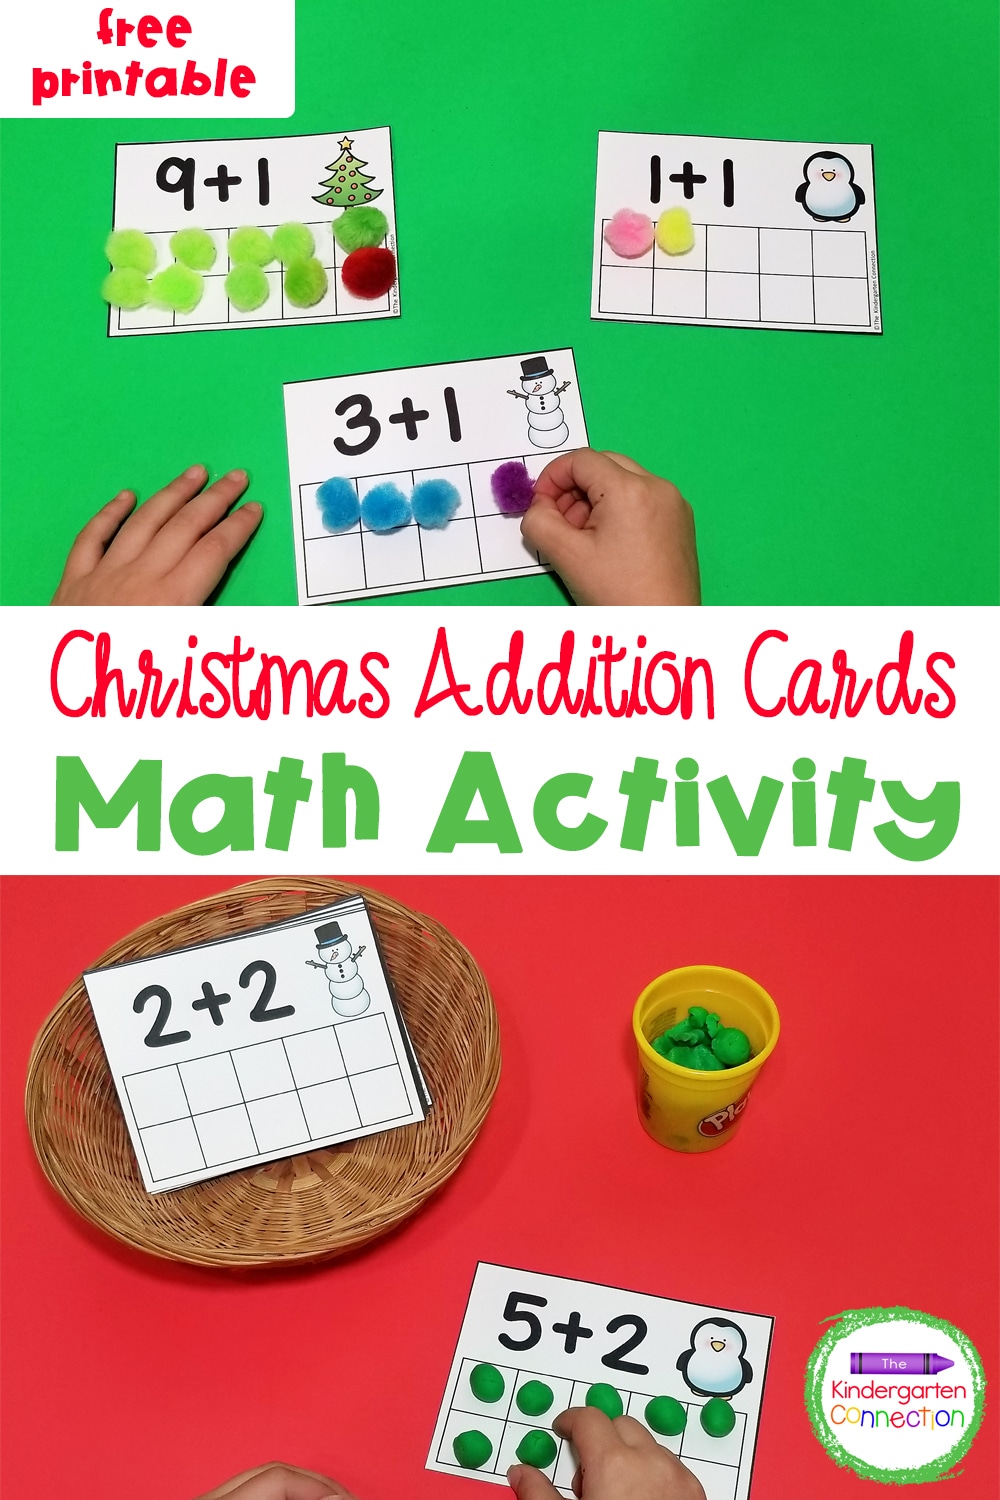 These free Christmas Addition Cards are a fantastic Christmas math activity for kids to work on counting and addition to ten!